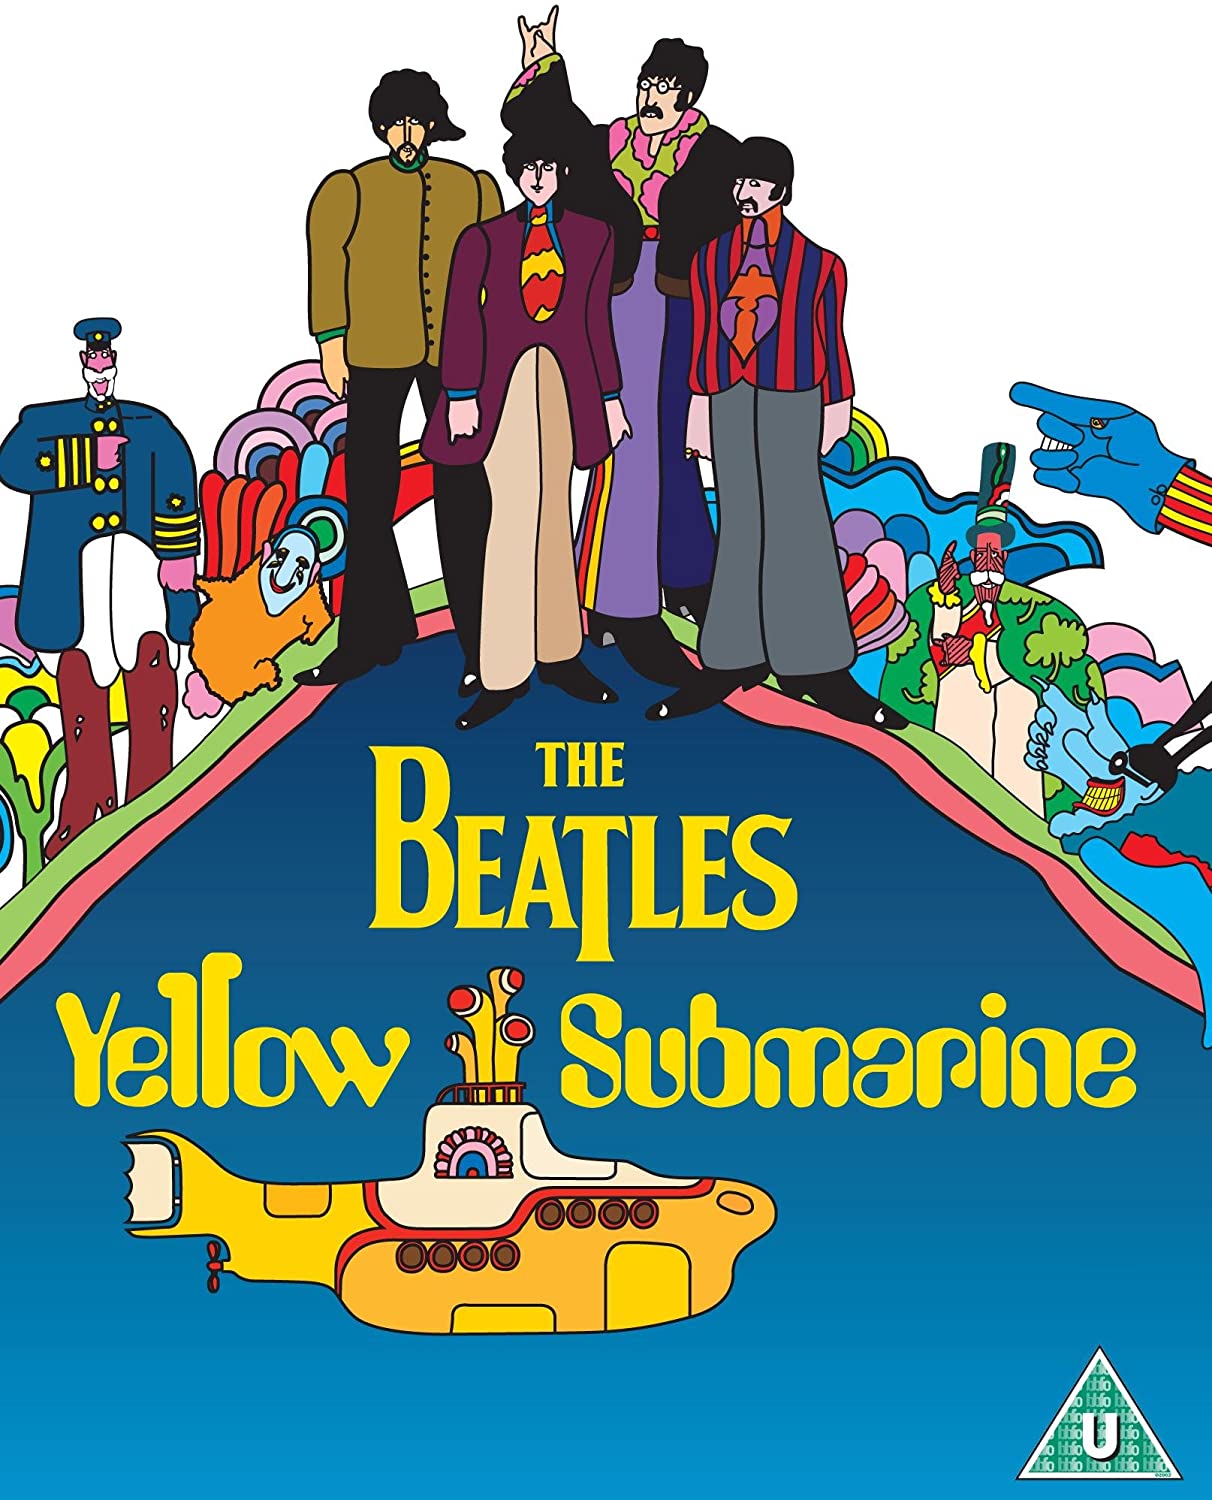 The beatles yellow submarine cover